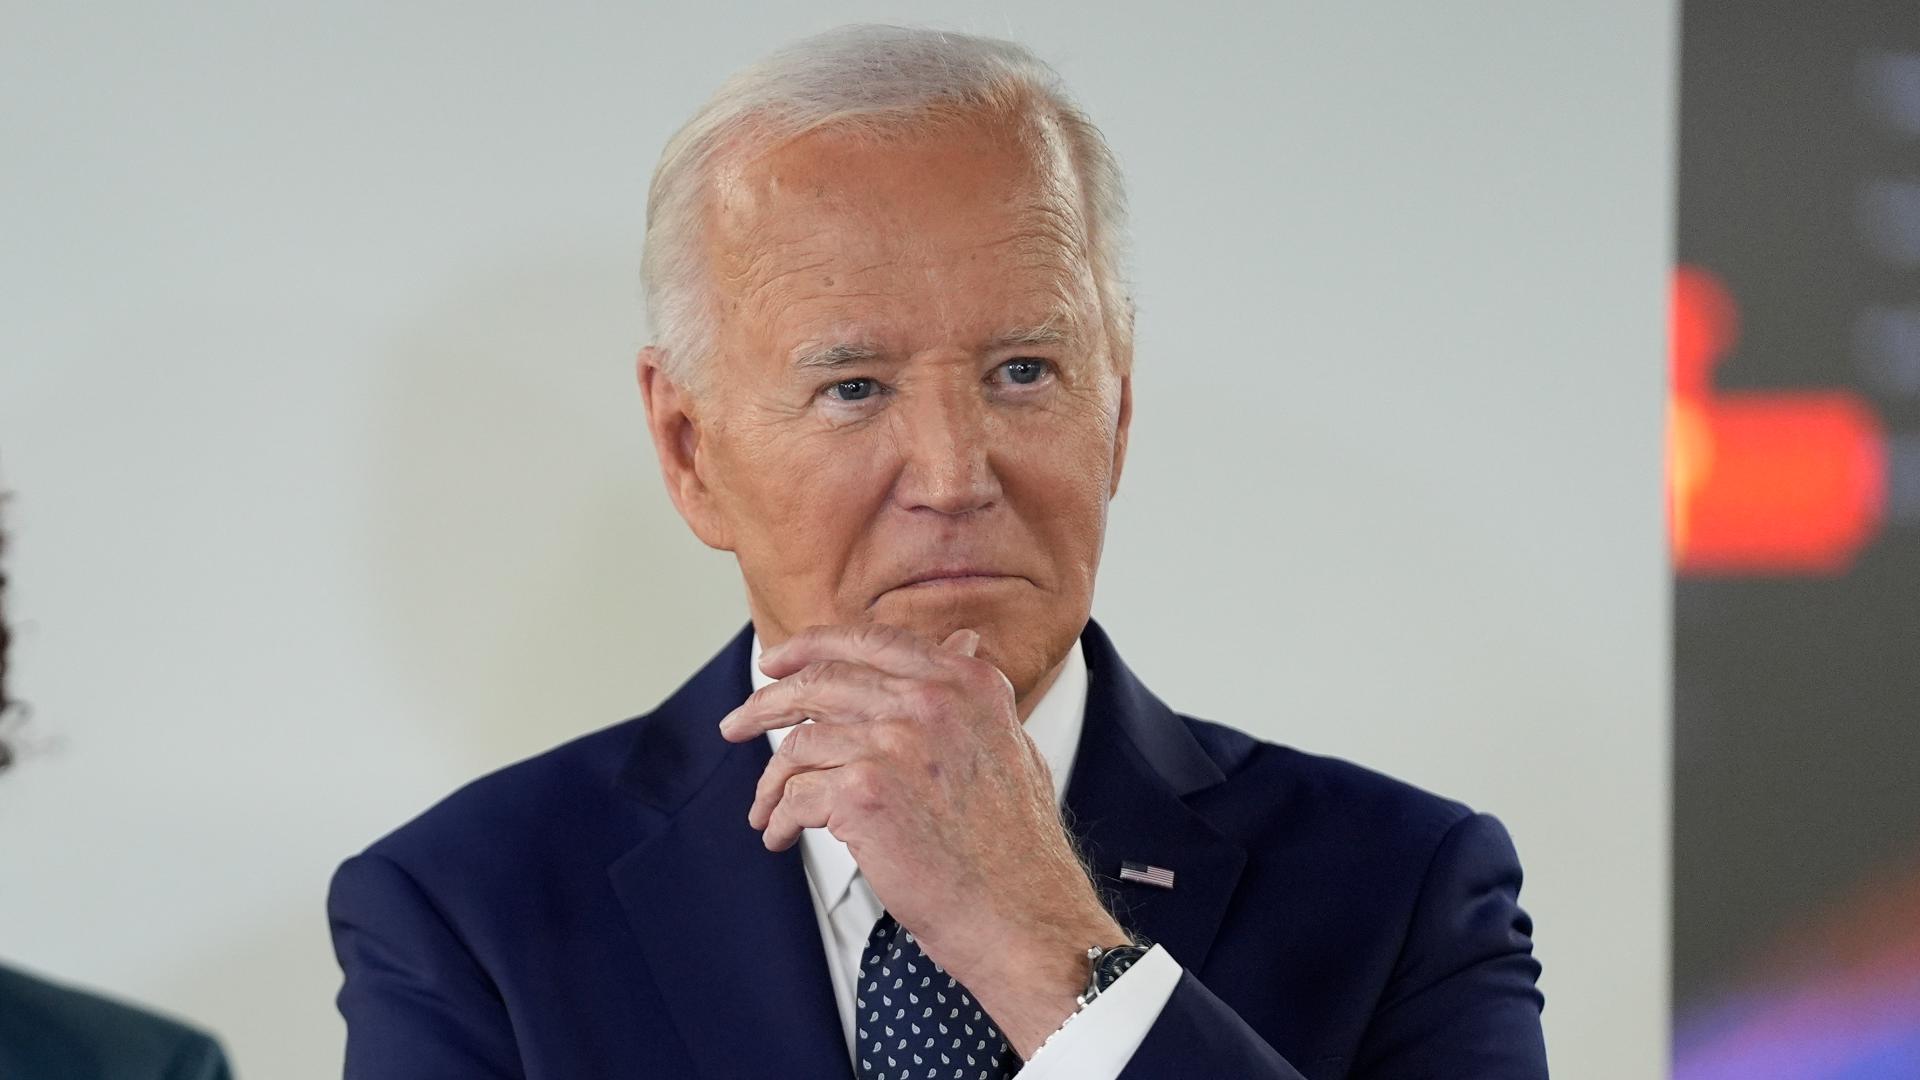 “I, honest to God, have never been more optimistic about America’s future if we stick together,” Biden told supporters over the weekend.